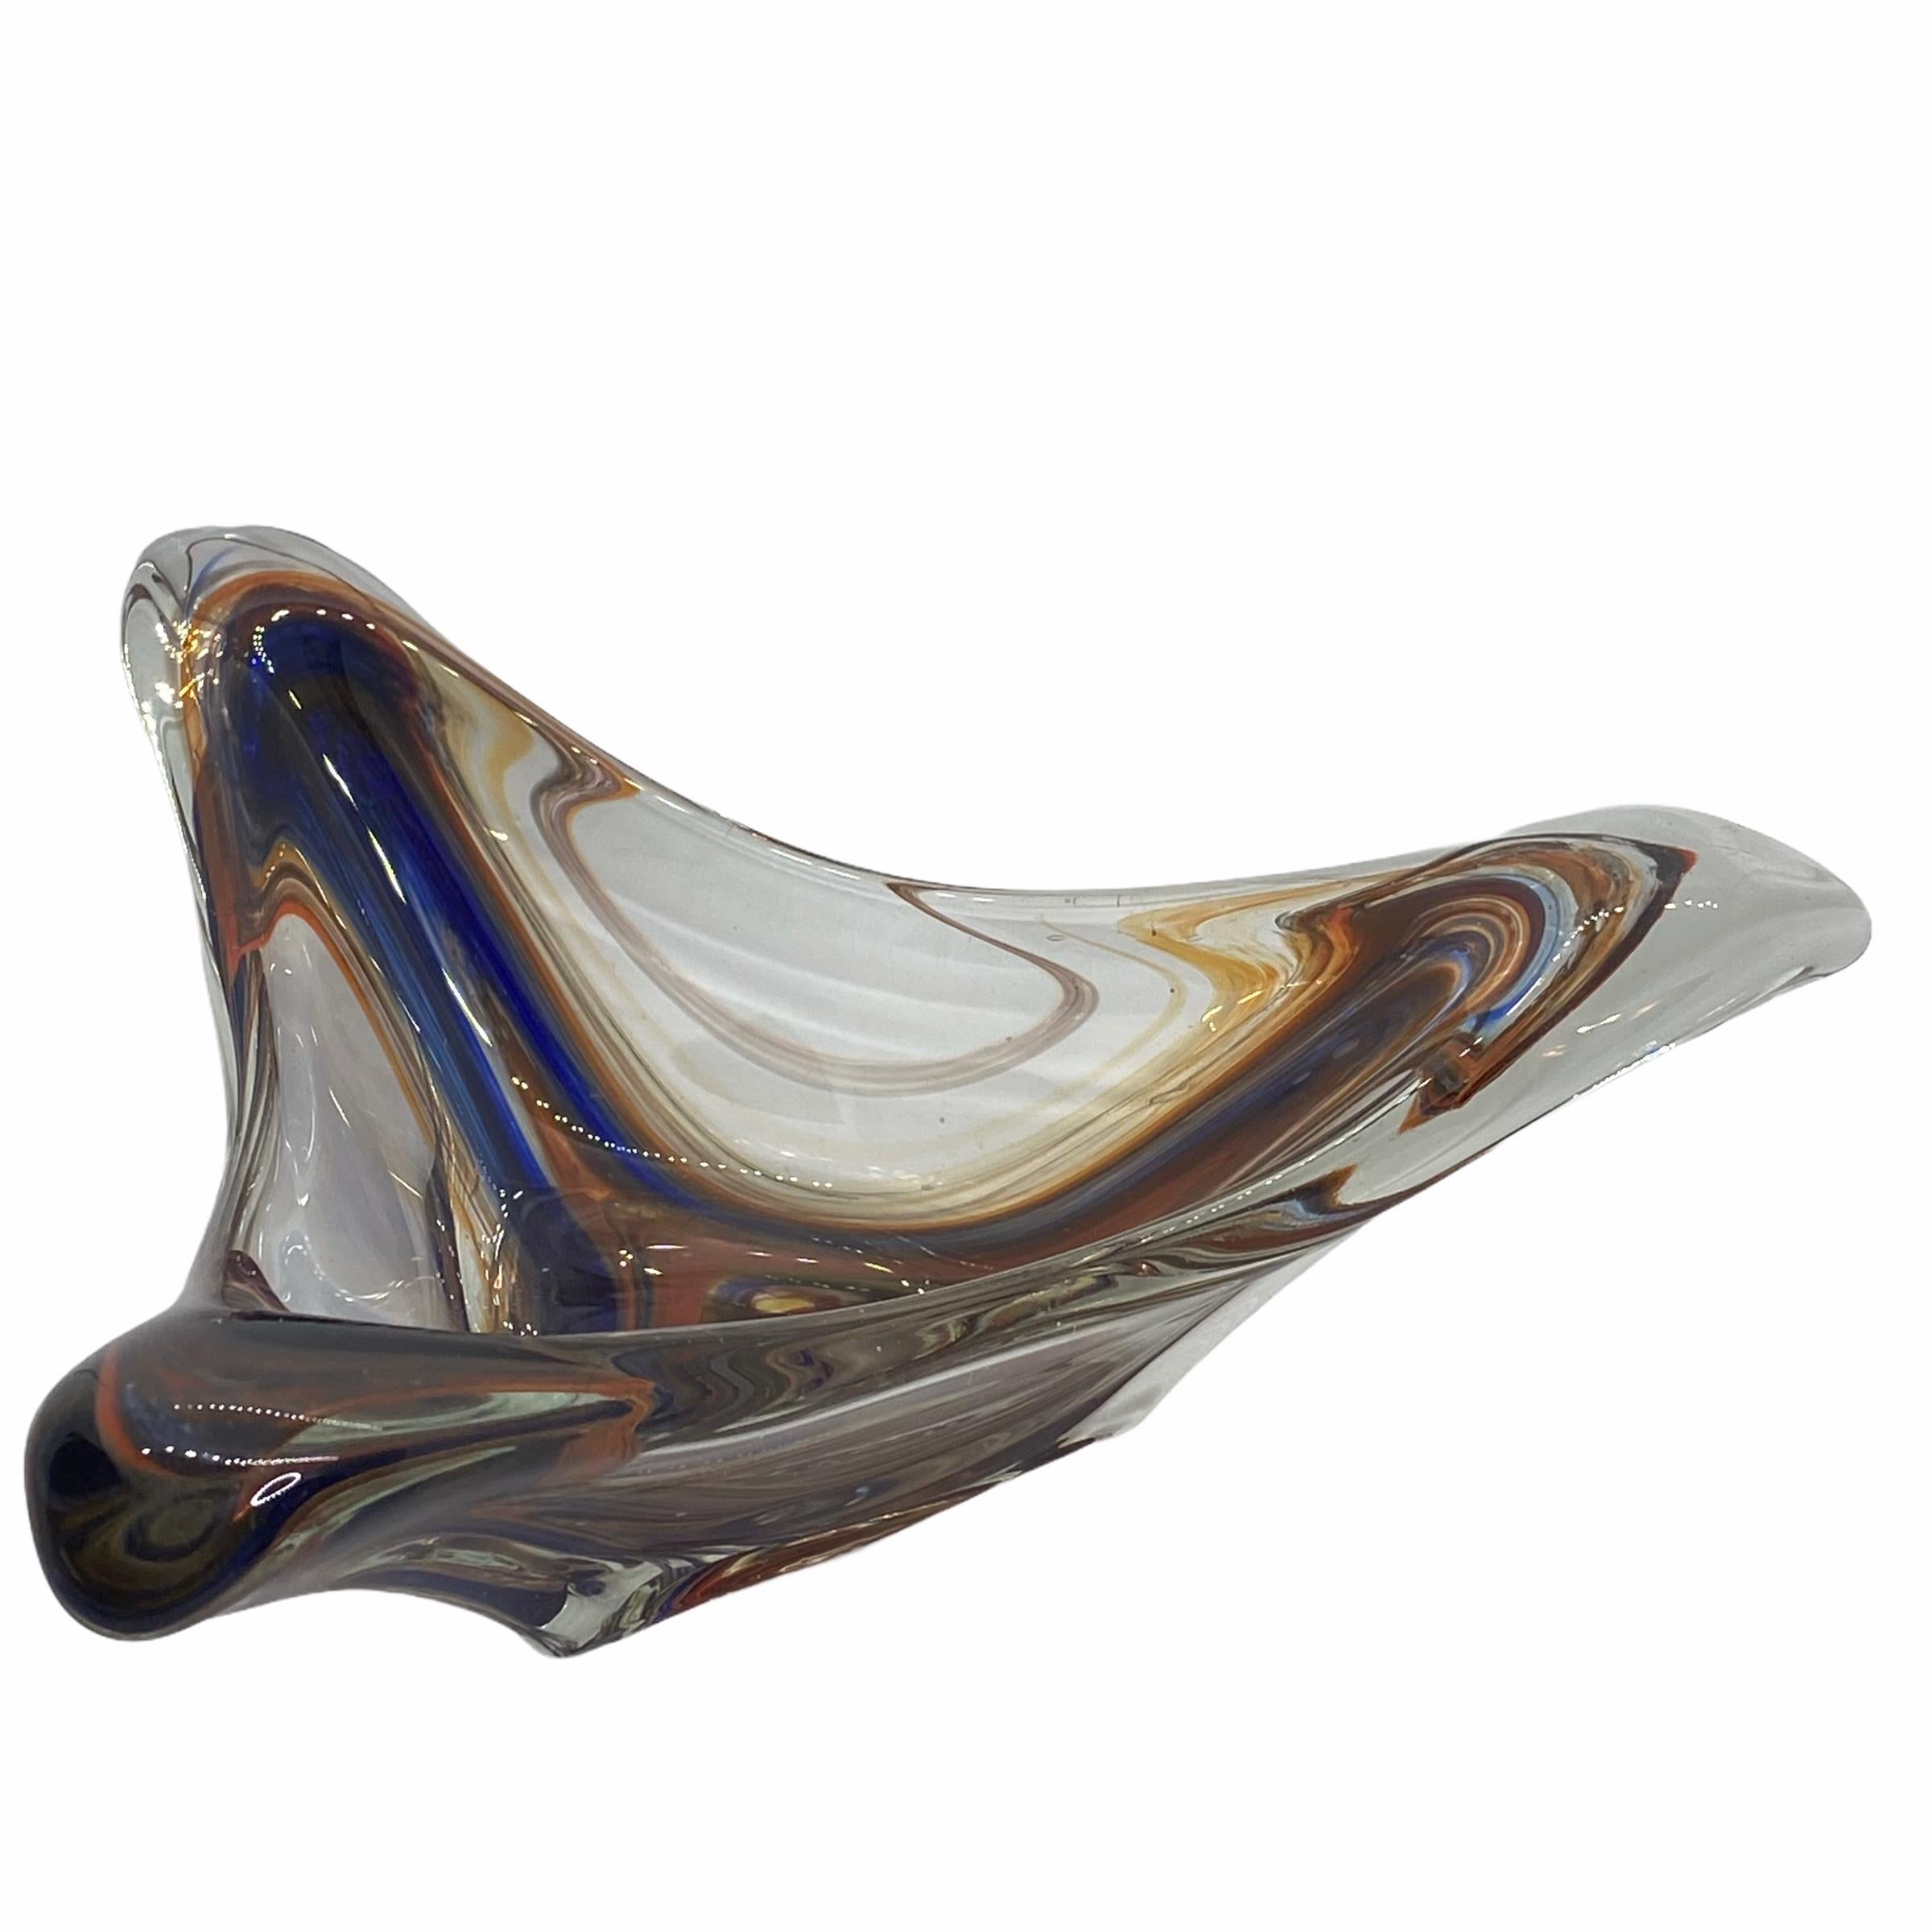 Gorgeous hand blown Murano art glass piece with Sommerso and bullicante techniques. A beautiful organic shaped bowl or catchall, Italy, 1980s.